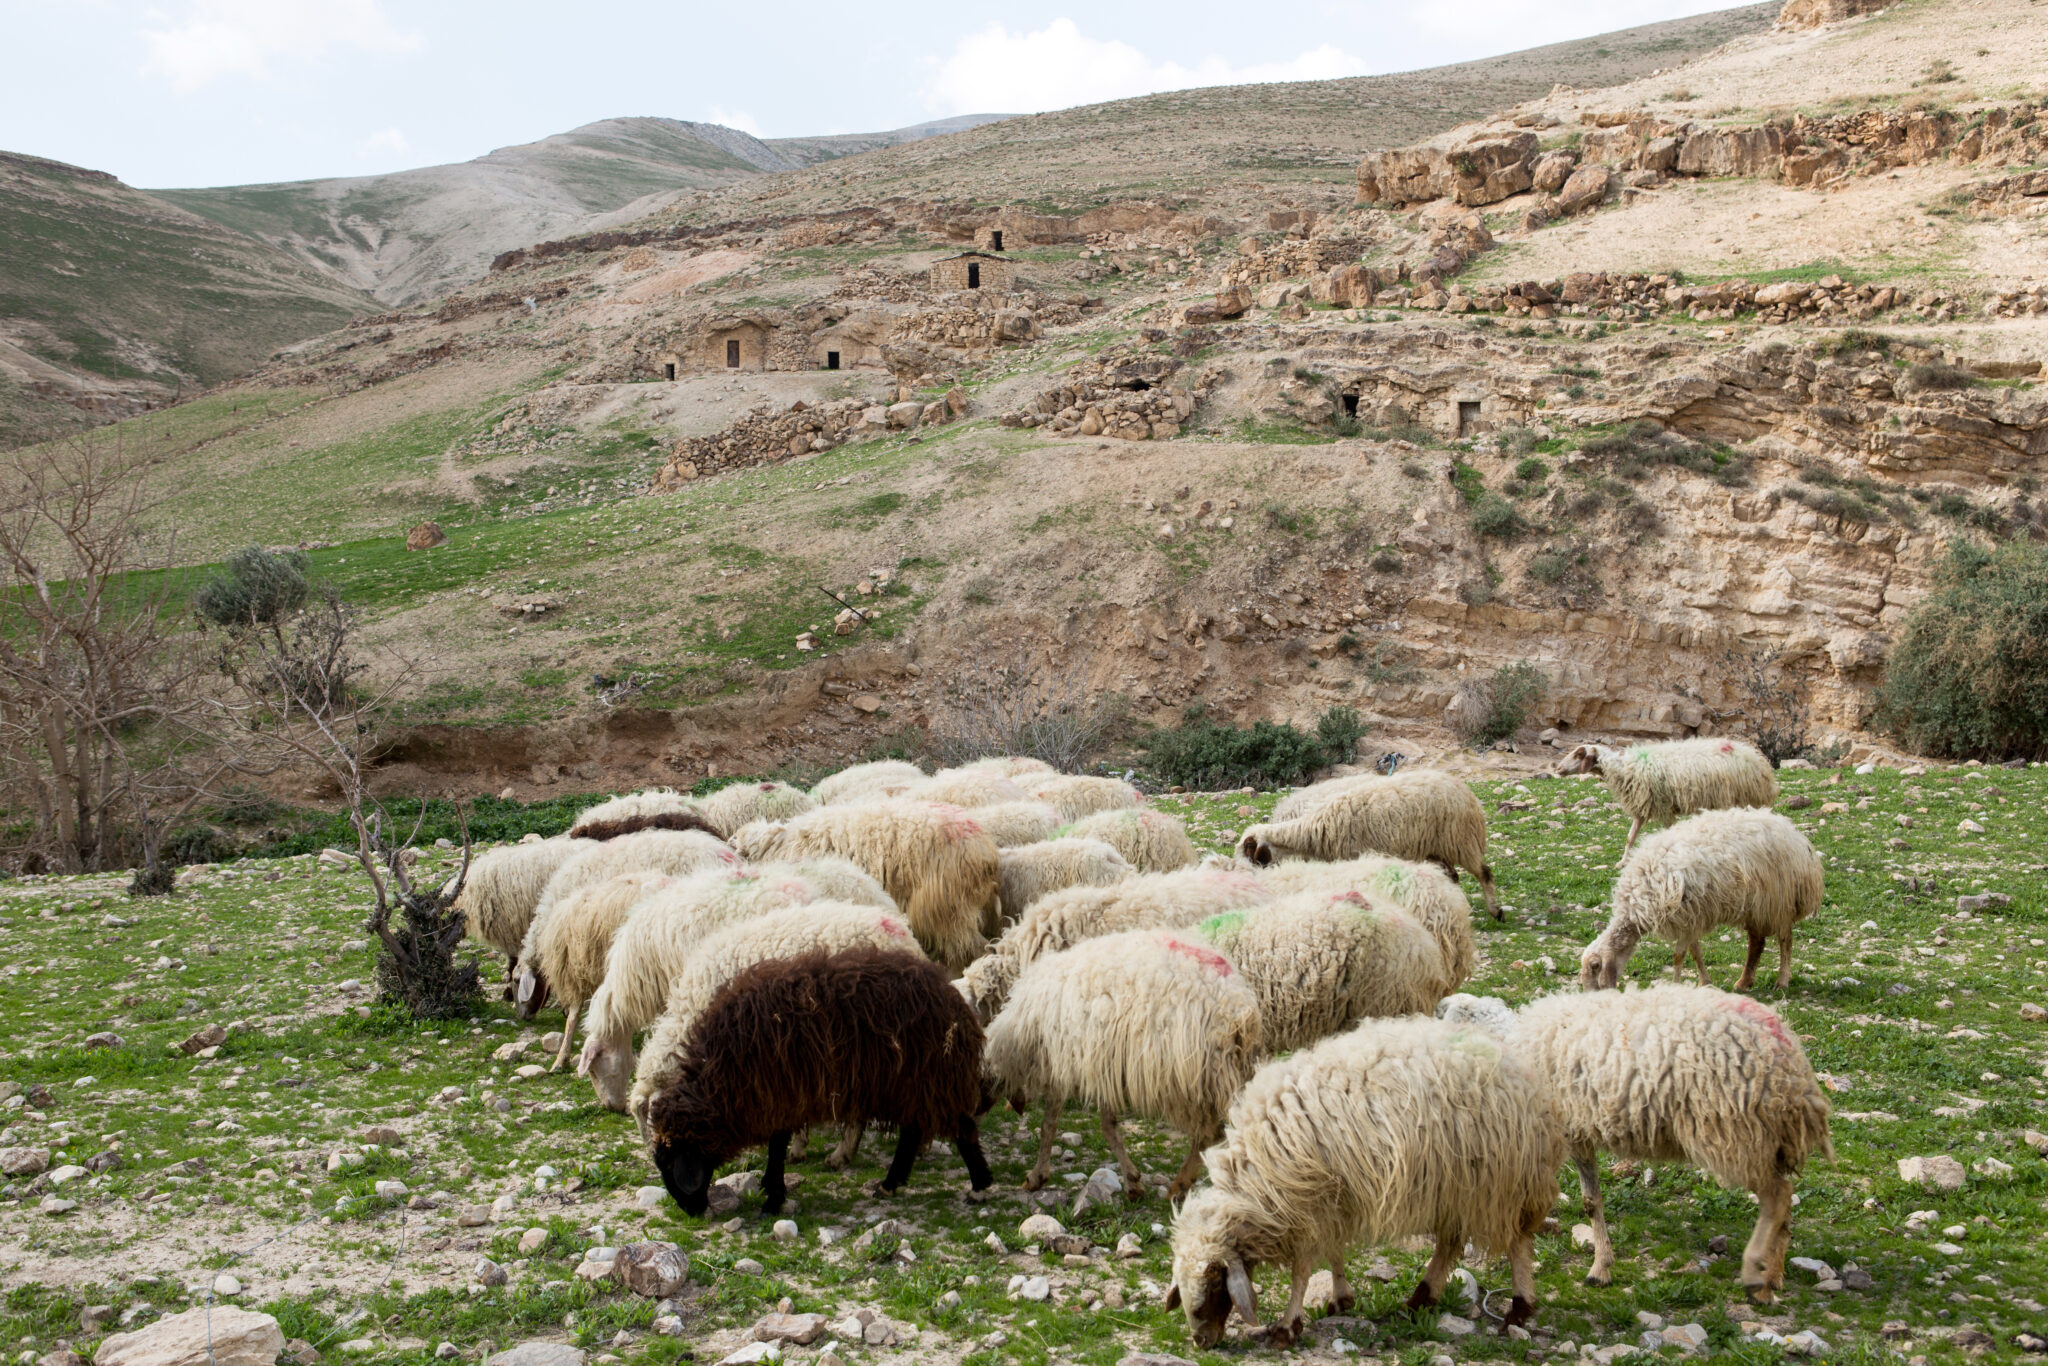 Sheep on pasture in Israely mountains in spring